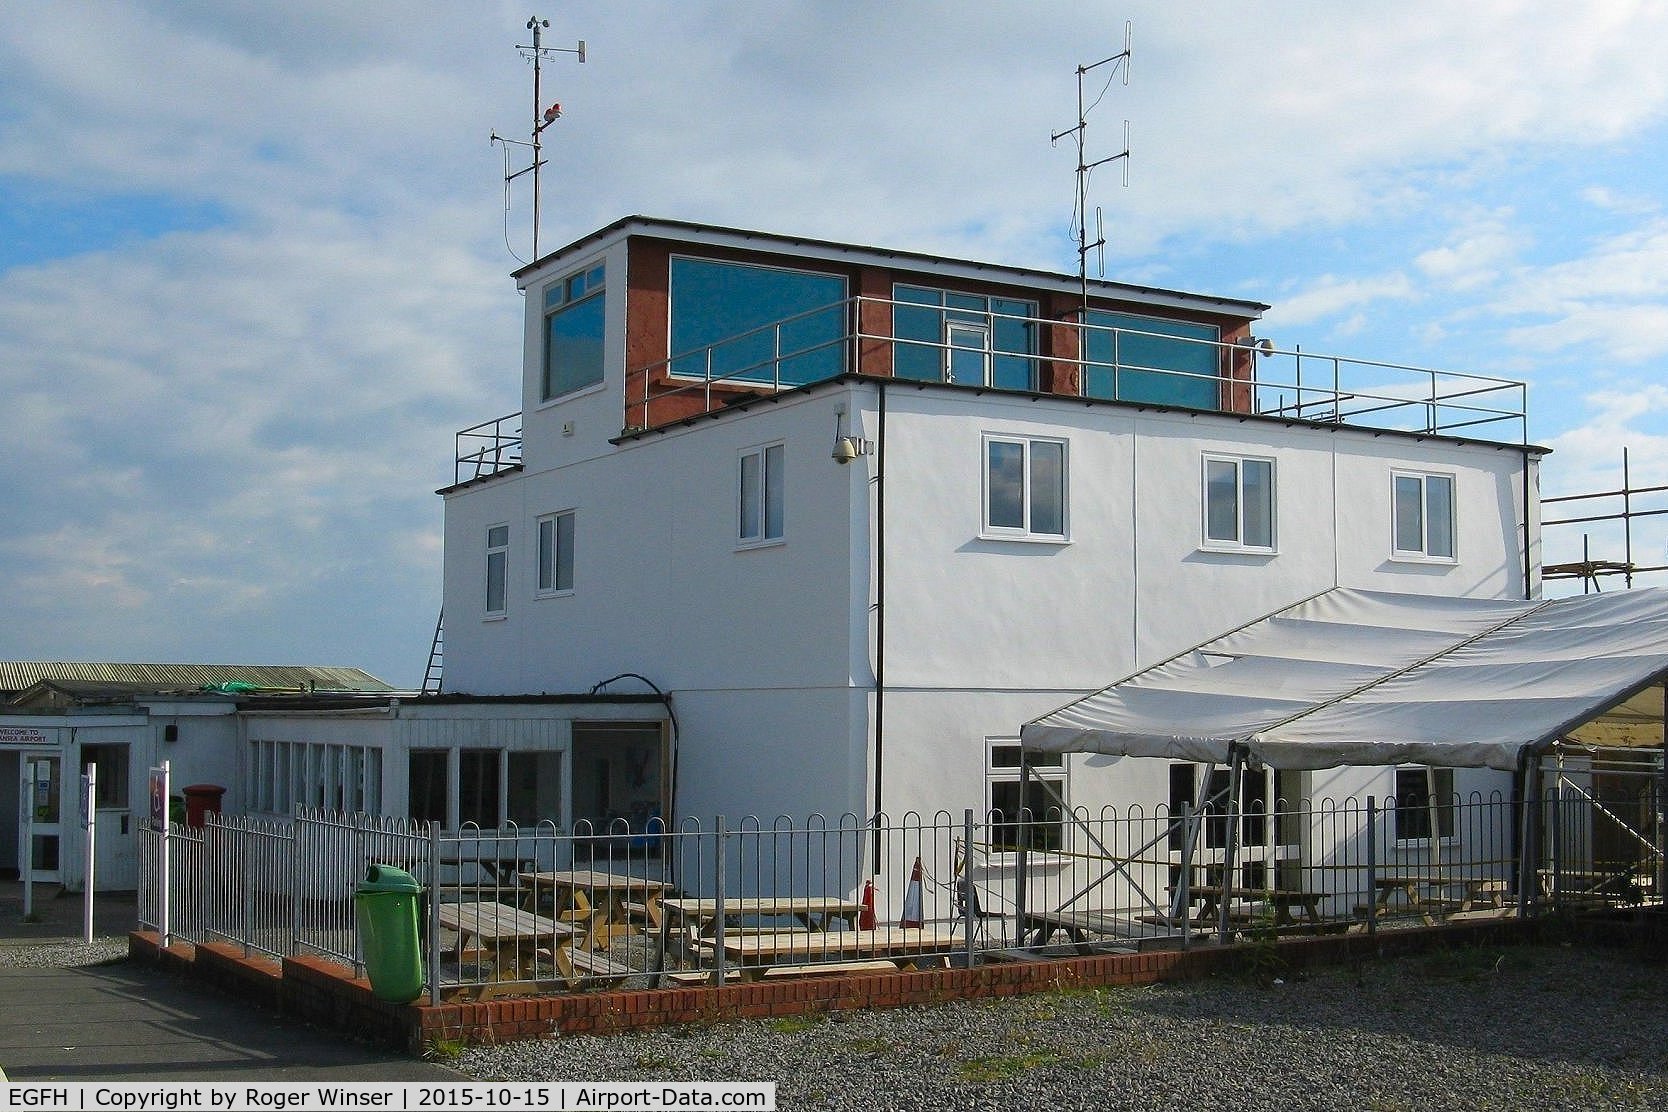 Swansea Airport, Swansea, Wales United Kingdom (EGFH) - Renovation of the outside of the main airport building almost finished.